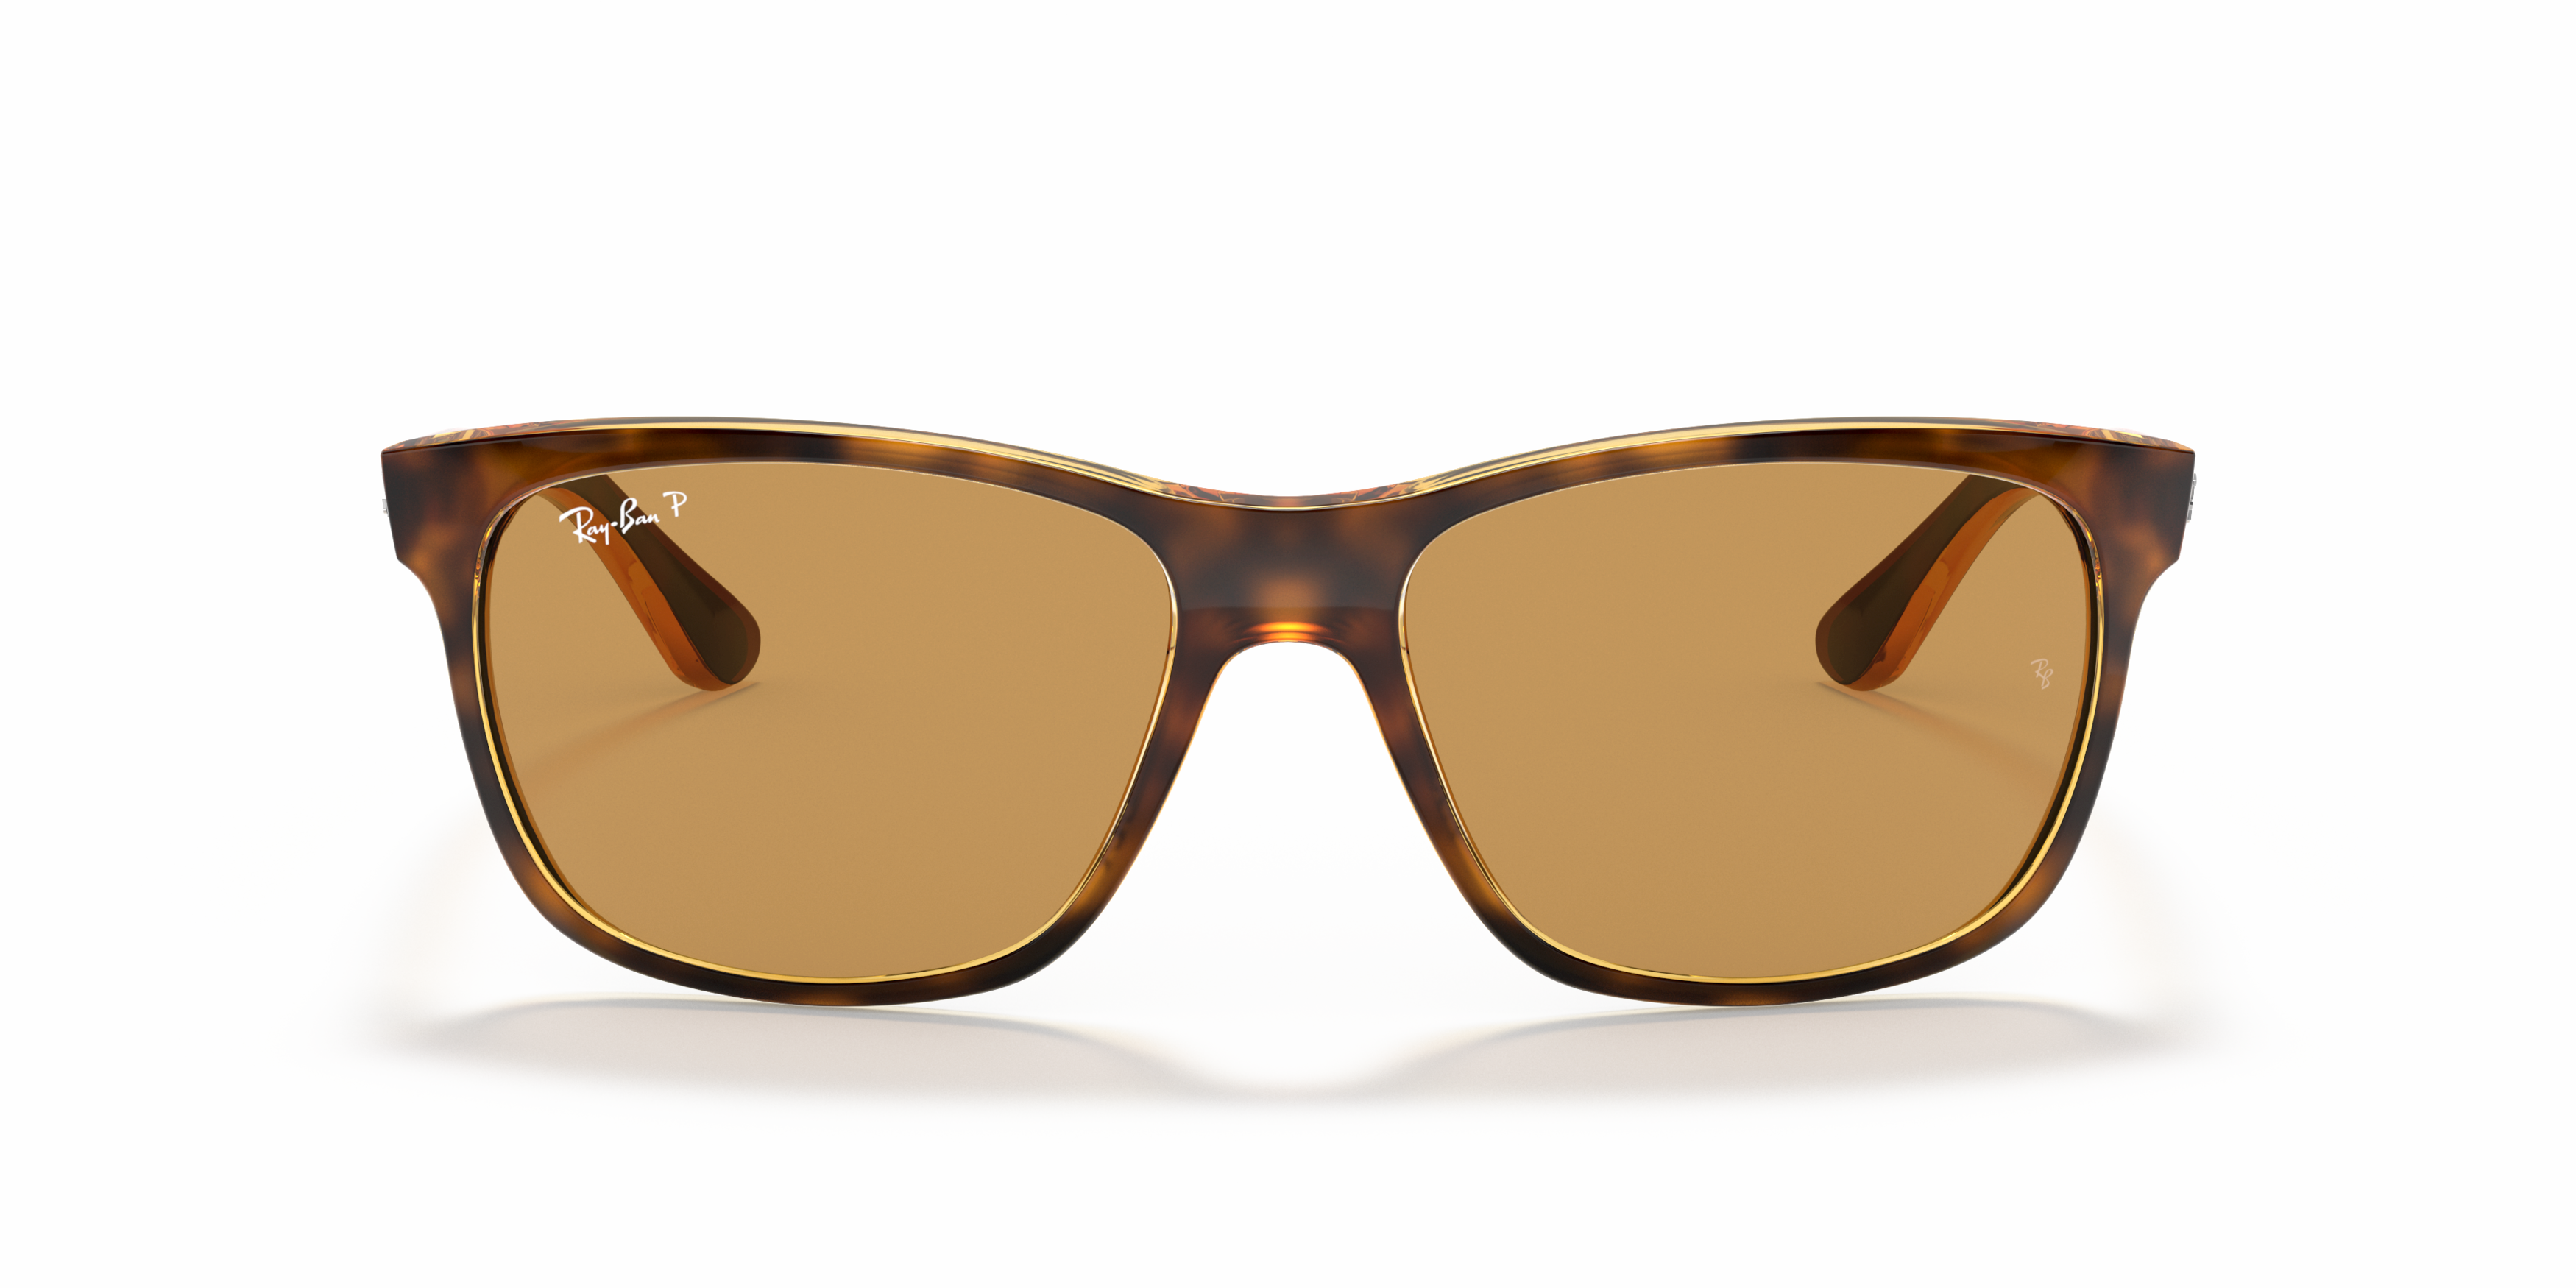 [products.image.front] Ray Ban 0RB4181 710/83